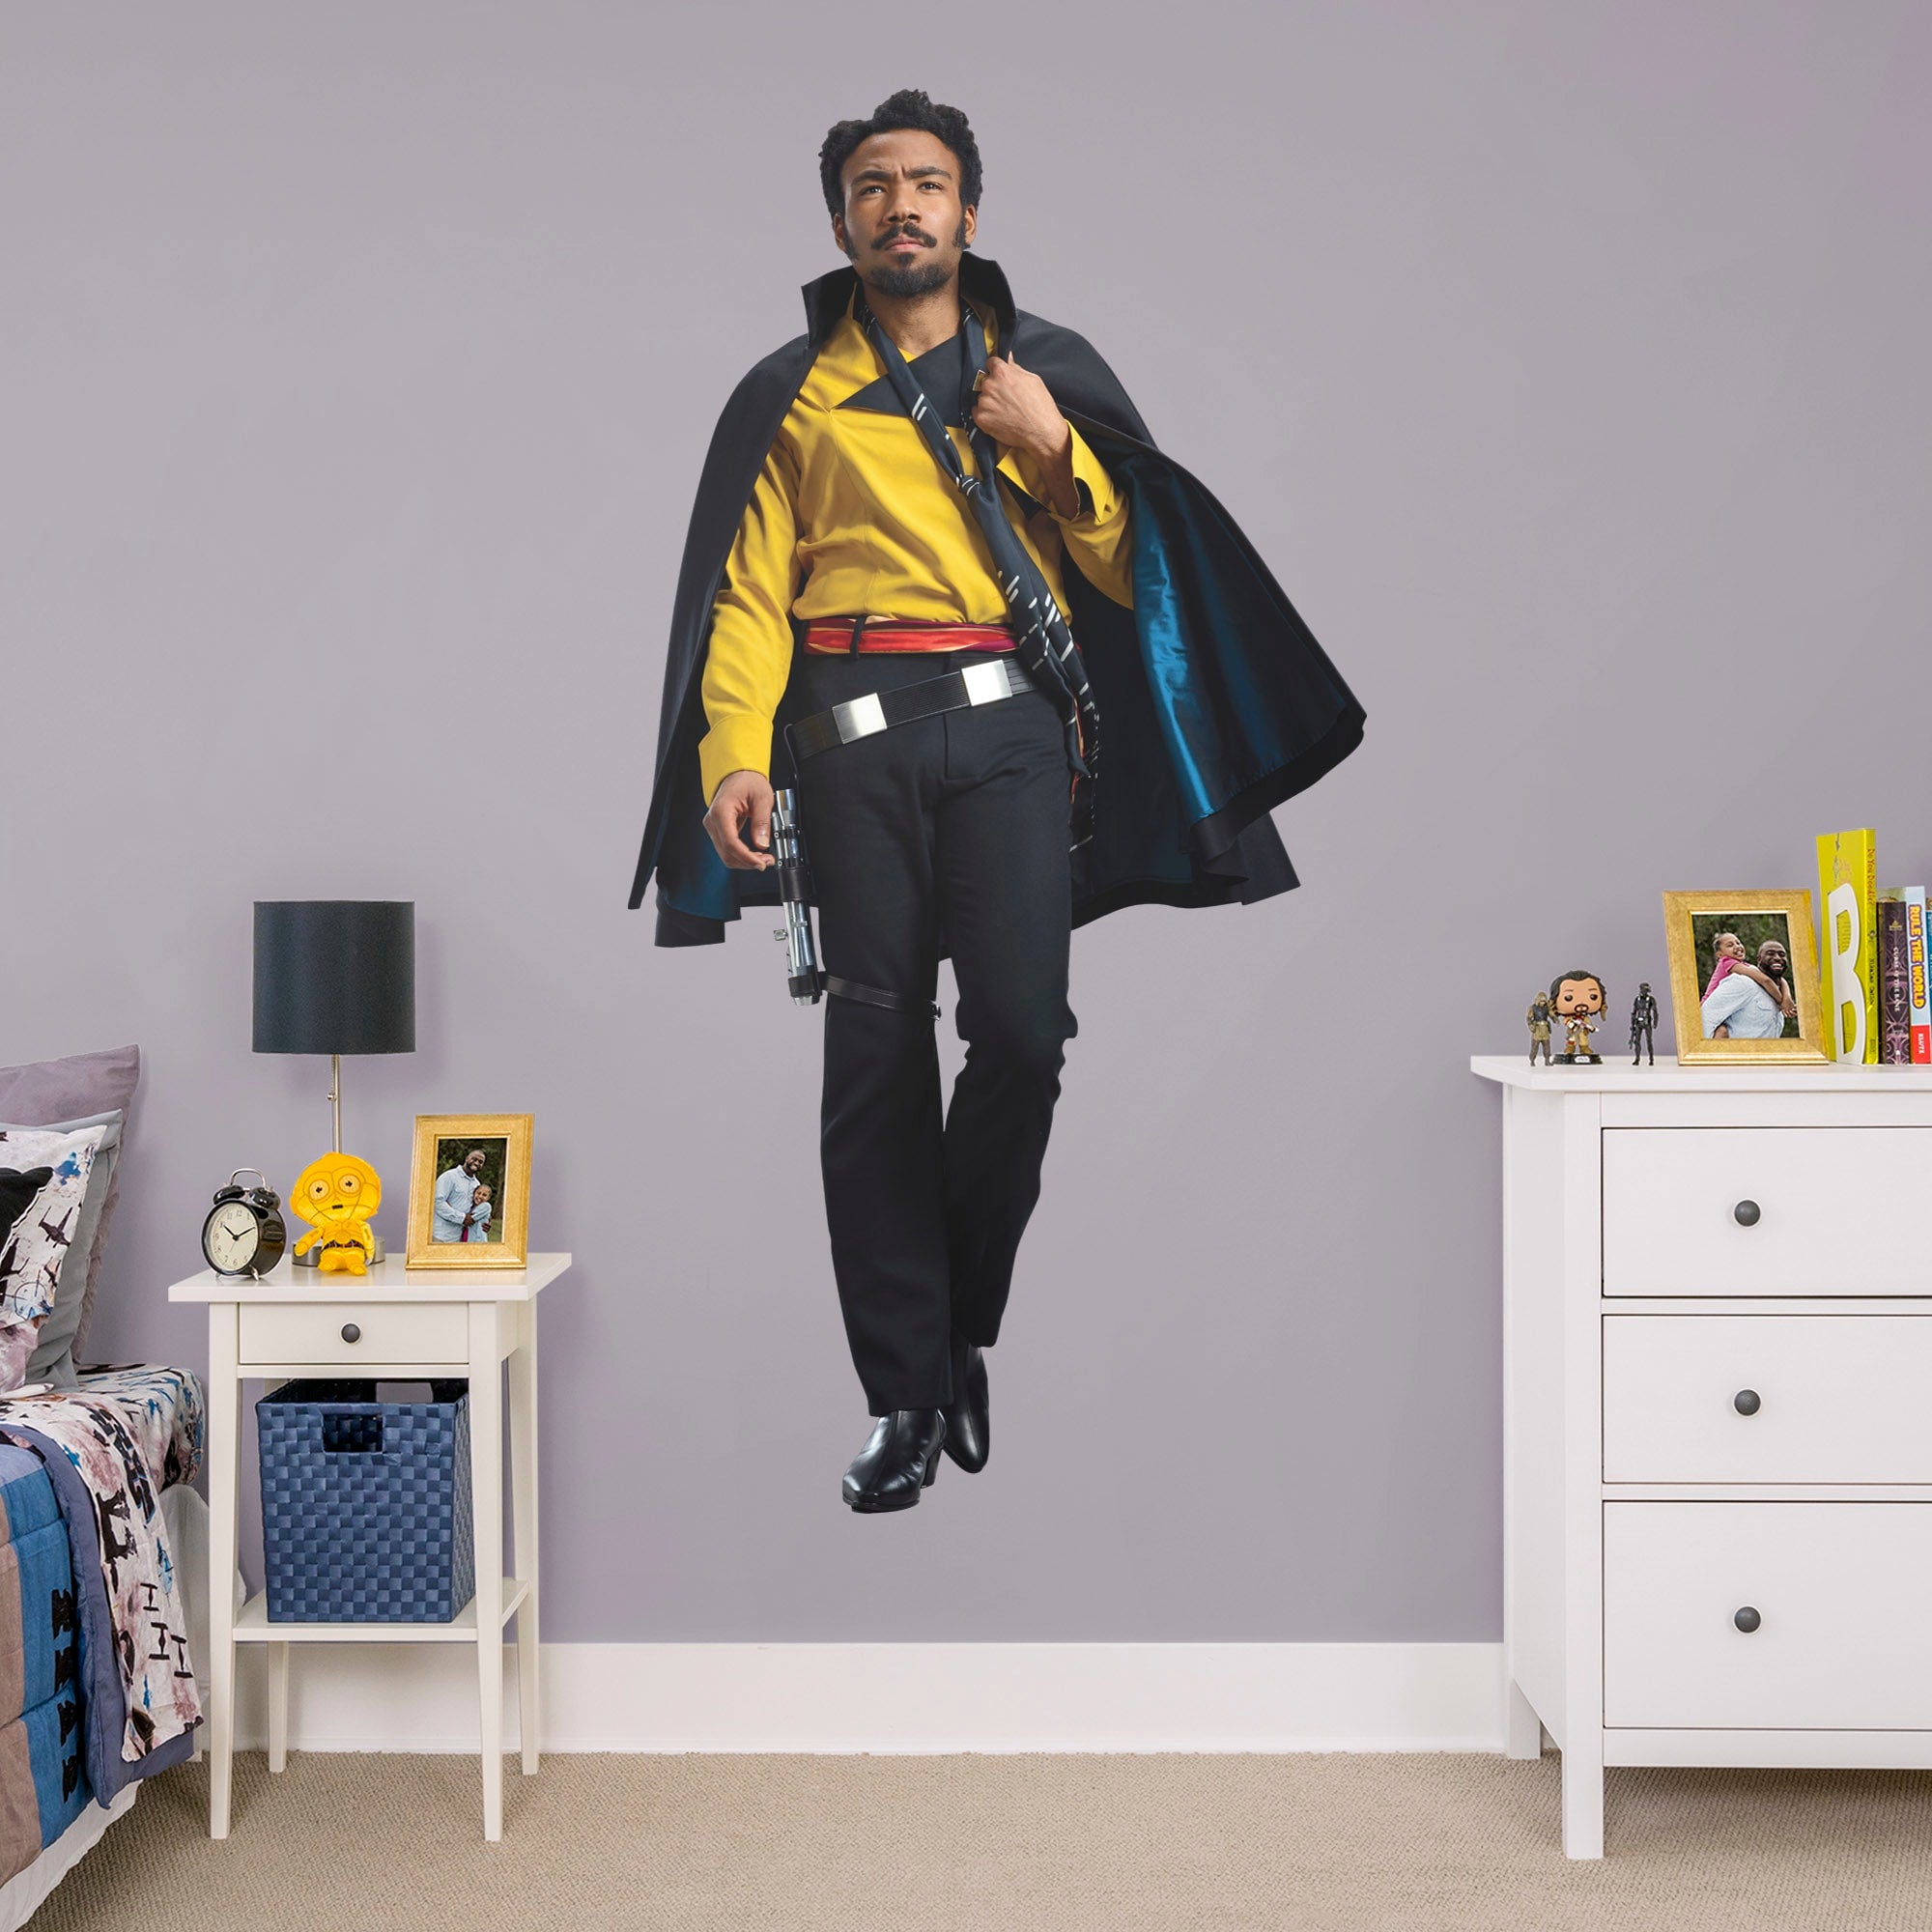 Lando Calrissian - Solo: A Star Wars Story - Officially Licensed Removable Wall Decal Life-Size Character + 2 Decals (40"W x 78"